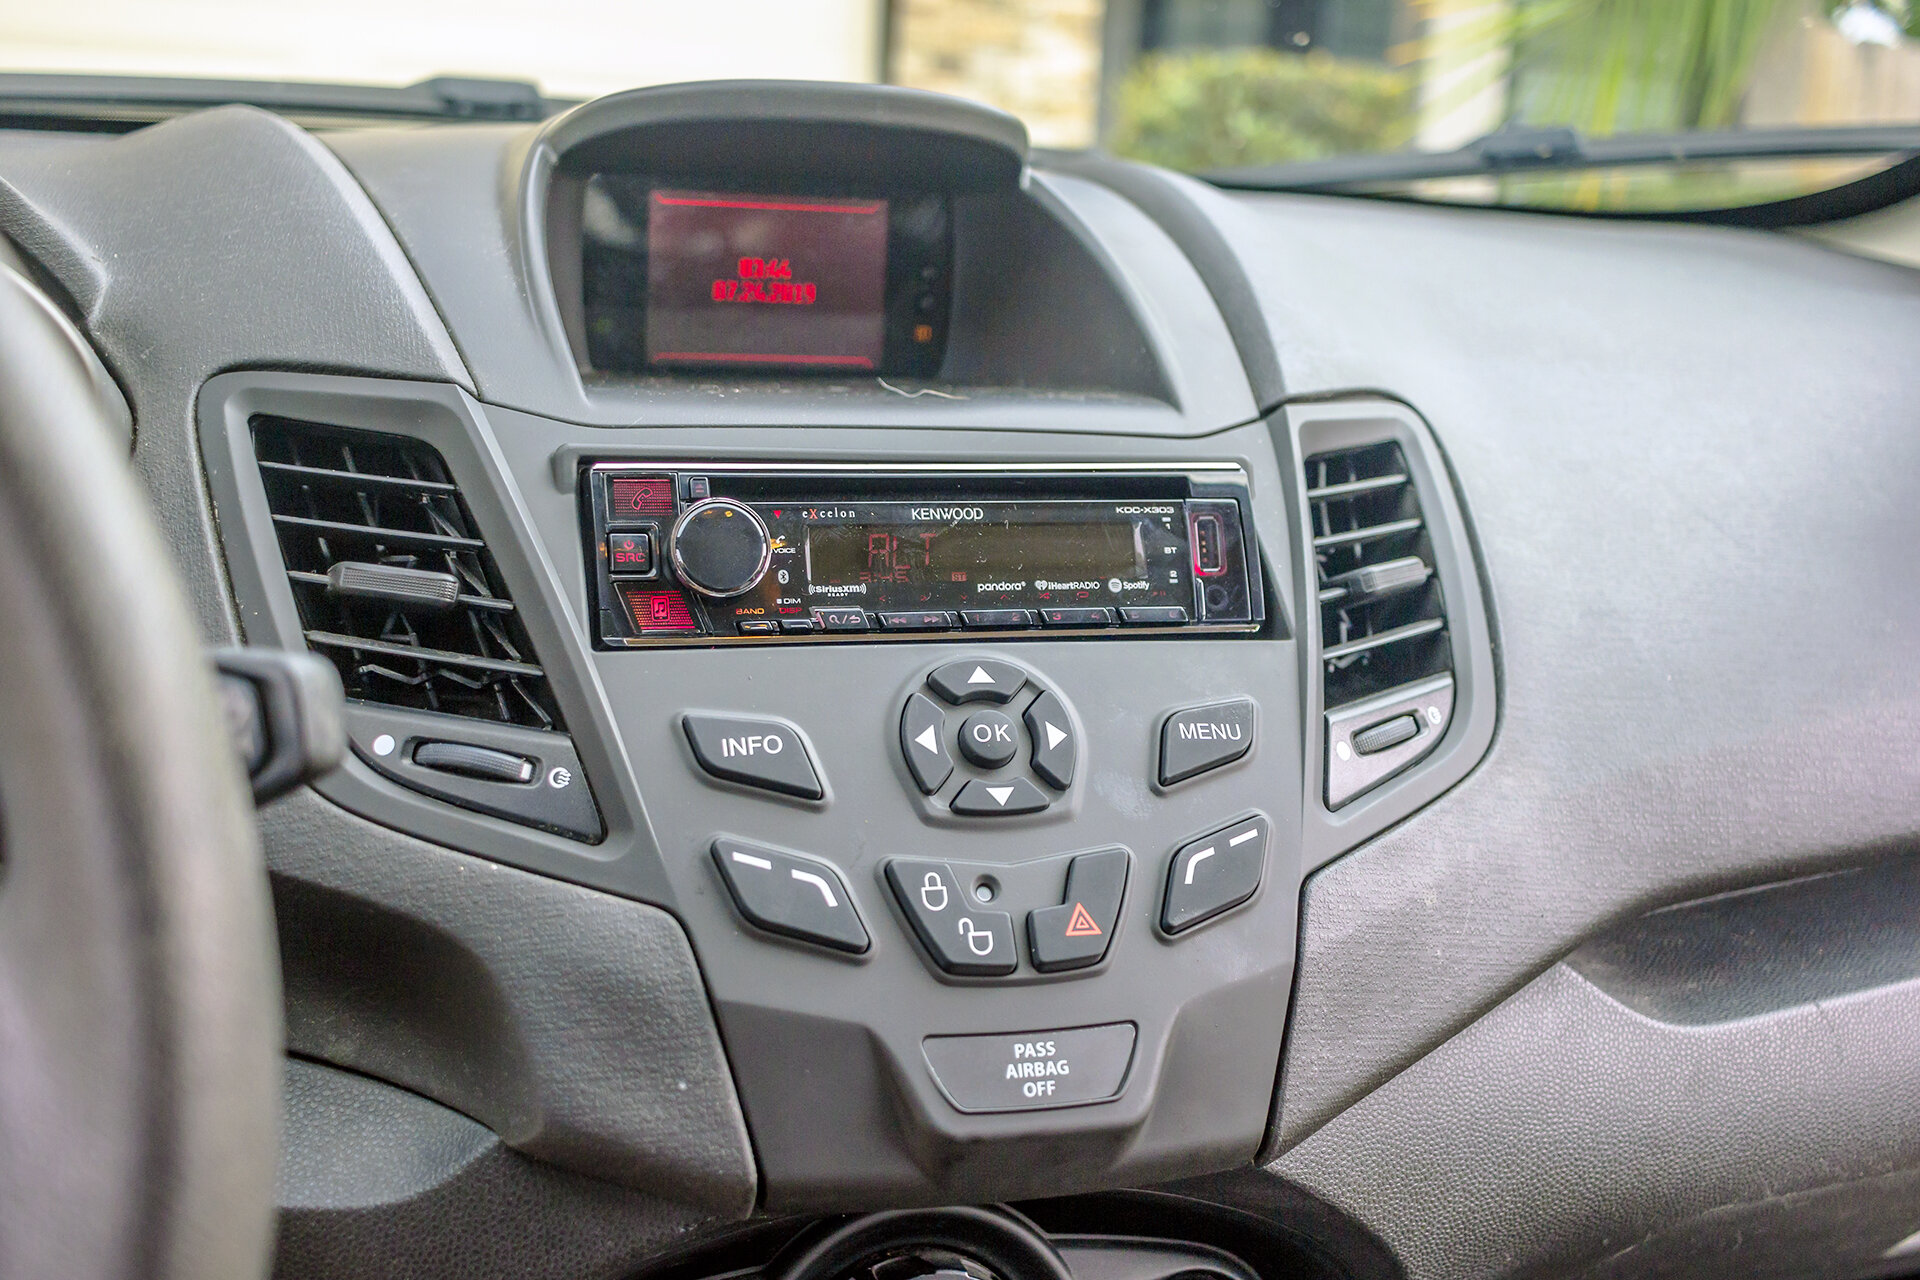 We replaced the faulty radio in this 2012 Focus! — Twelve Volt